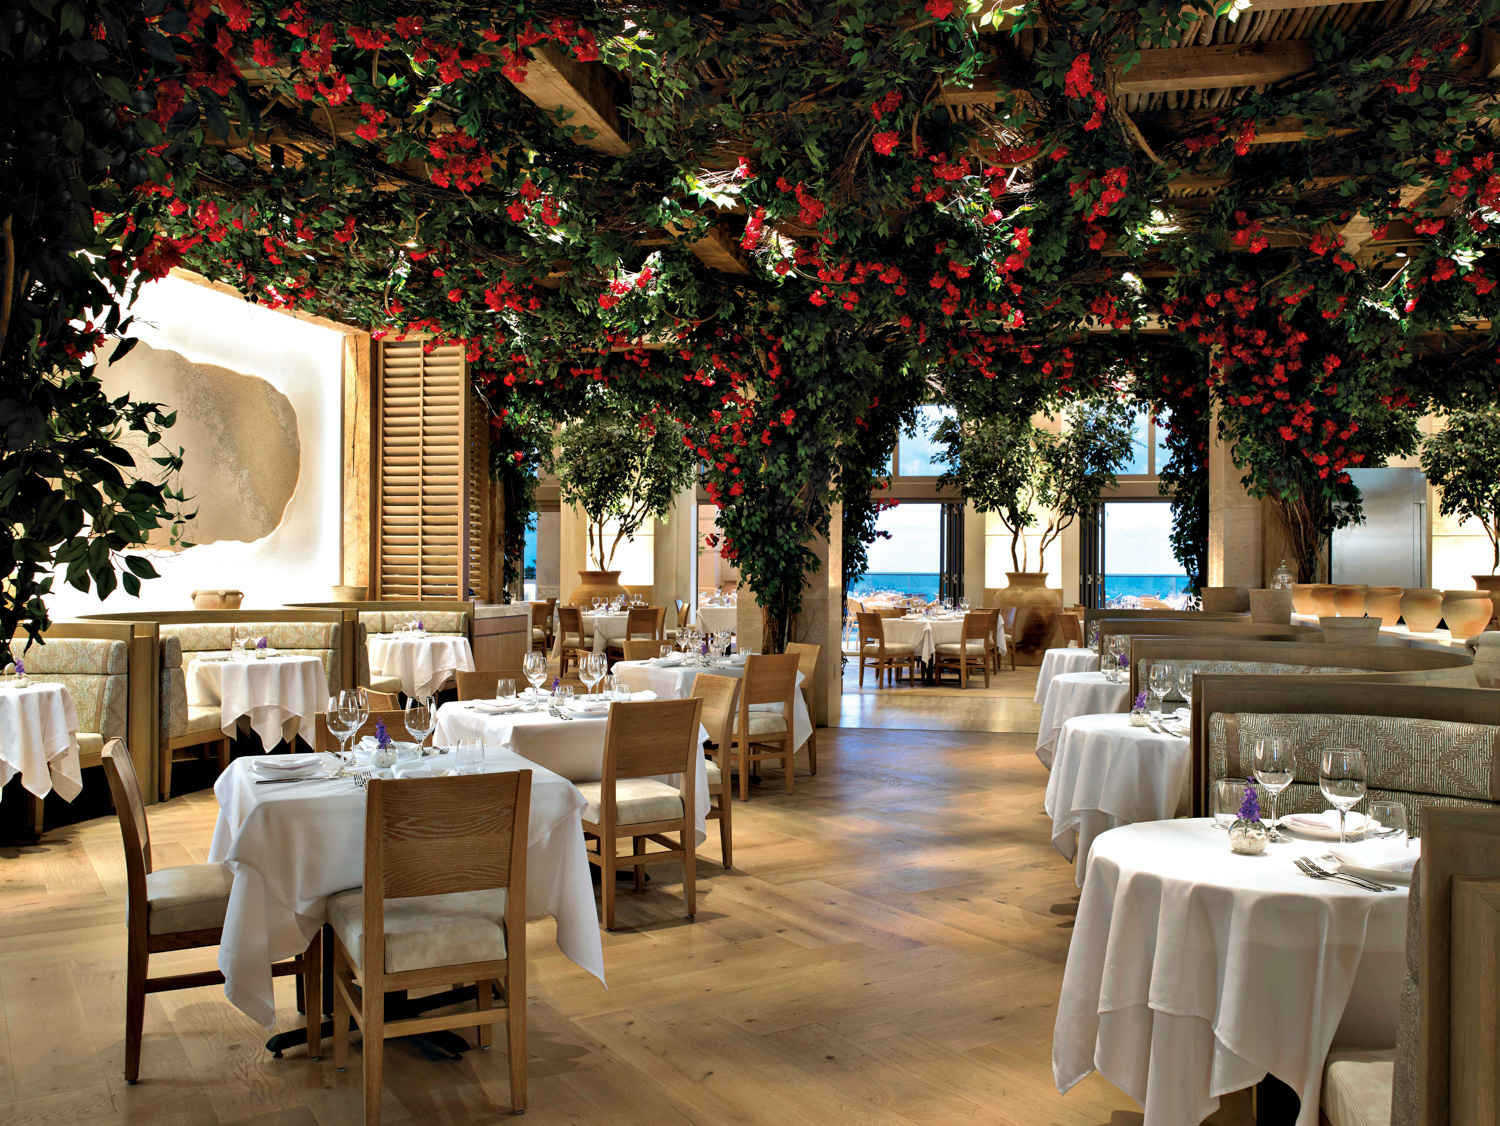 Restaurant with a red flowery ceiling installation and door to outdoor patio seating and water views in Acqualina Resort